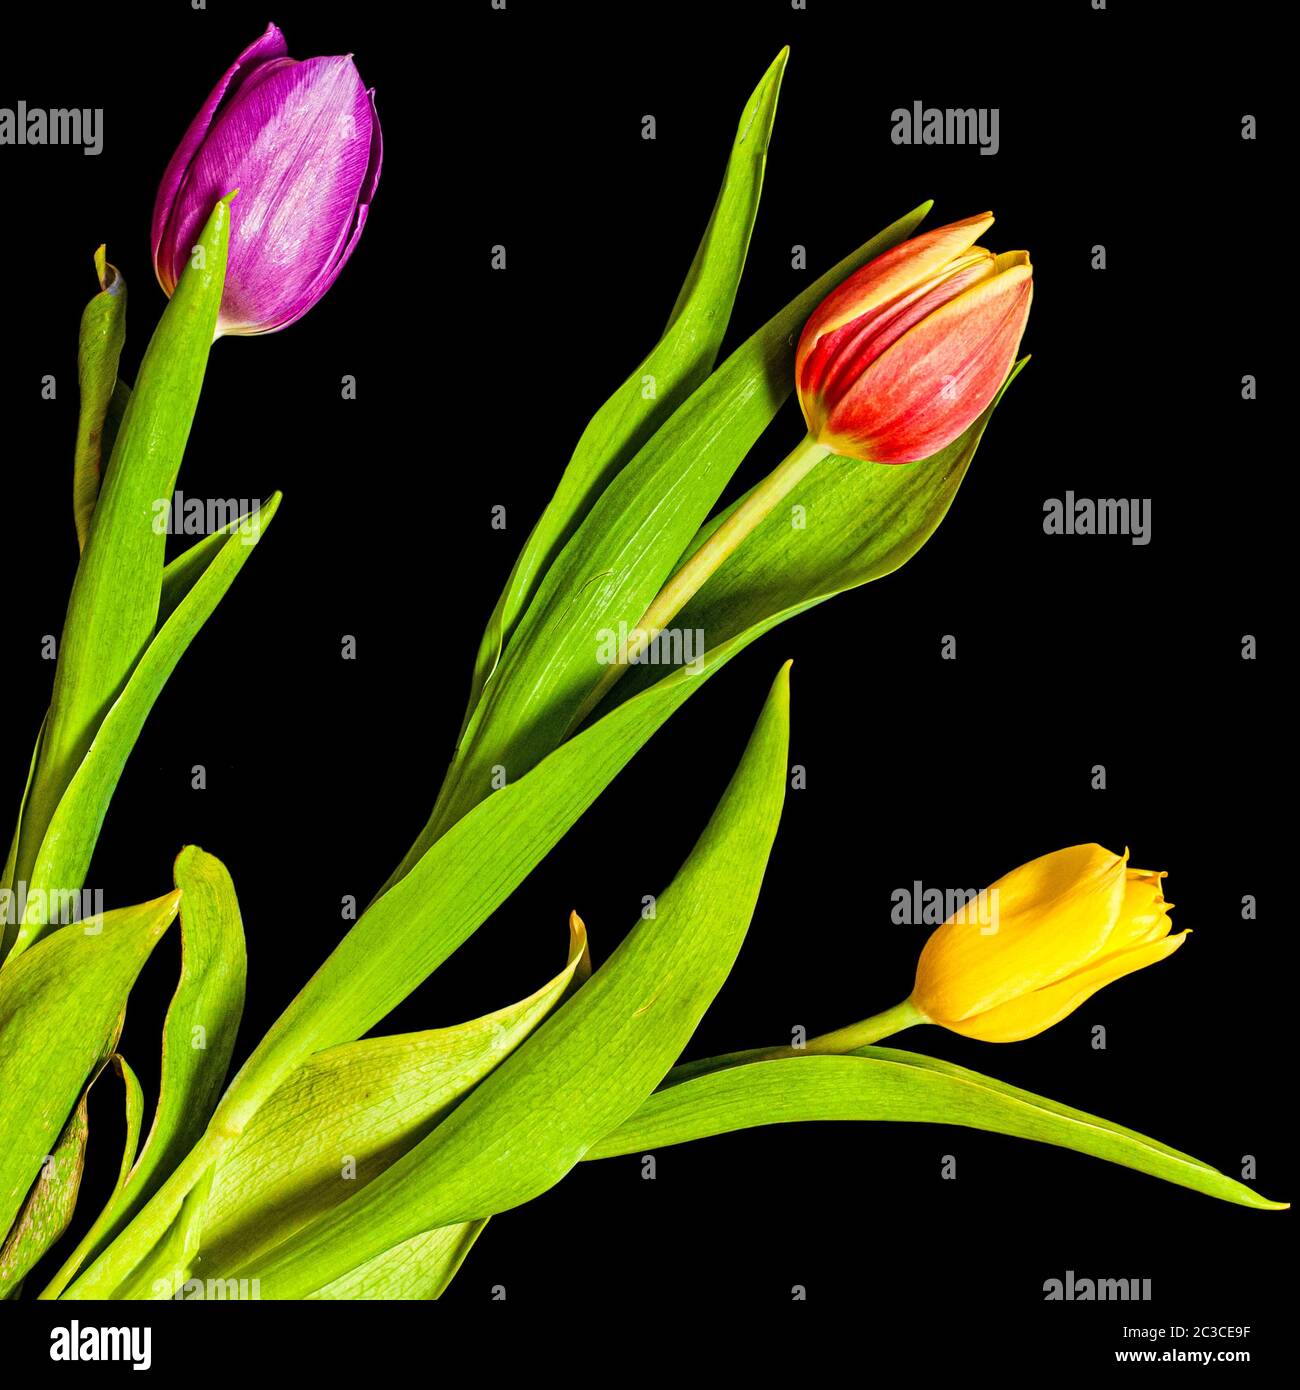 Blooming lovely. Flowers growing and blooming representing new hope and growth during dark times. Stock Photo